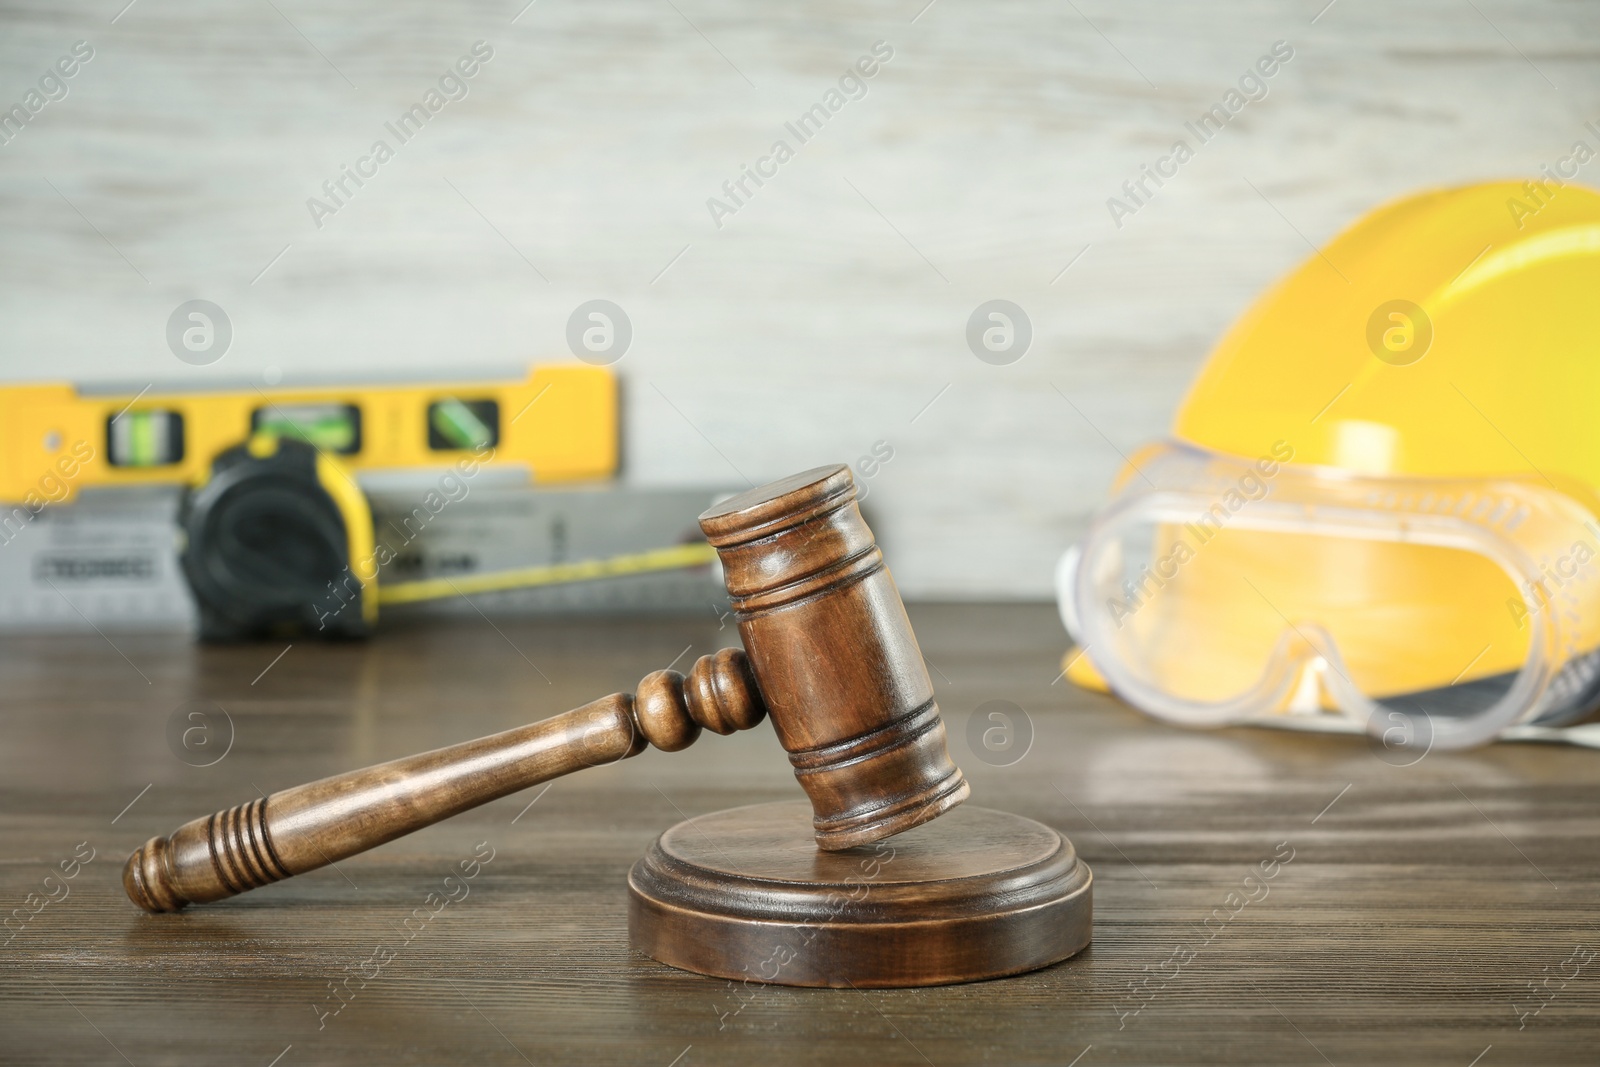 Photo of Construction and land law concepts. Judge gavel, protective helmet with safety goggles on wooden table